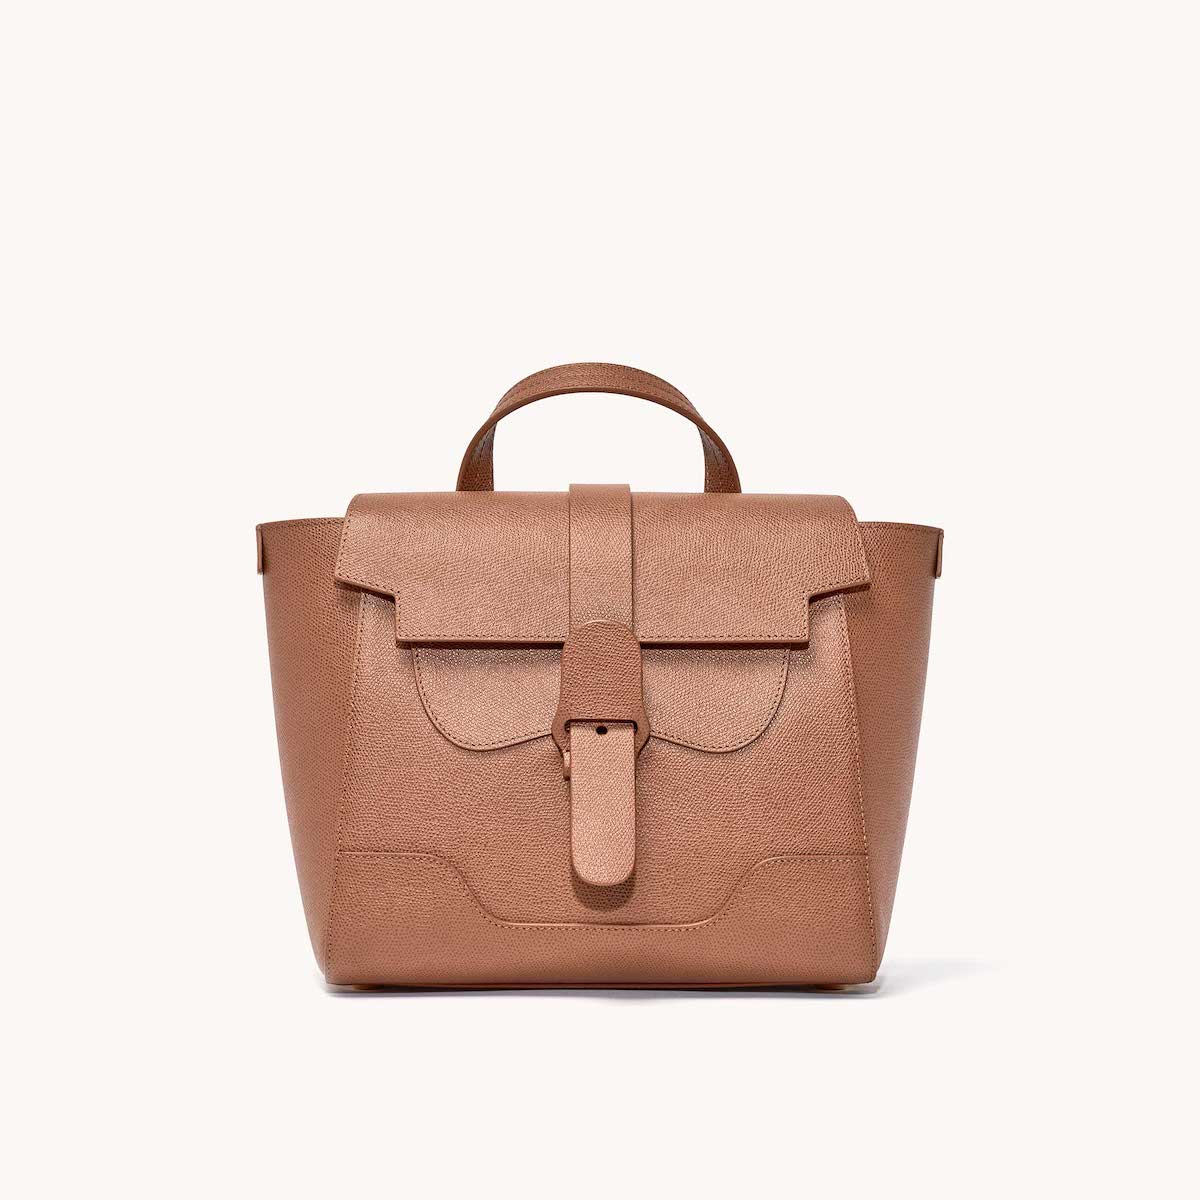 Midi Maestra Bag Pebbled Chestnut with Gold Hardware Front View